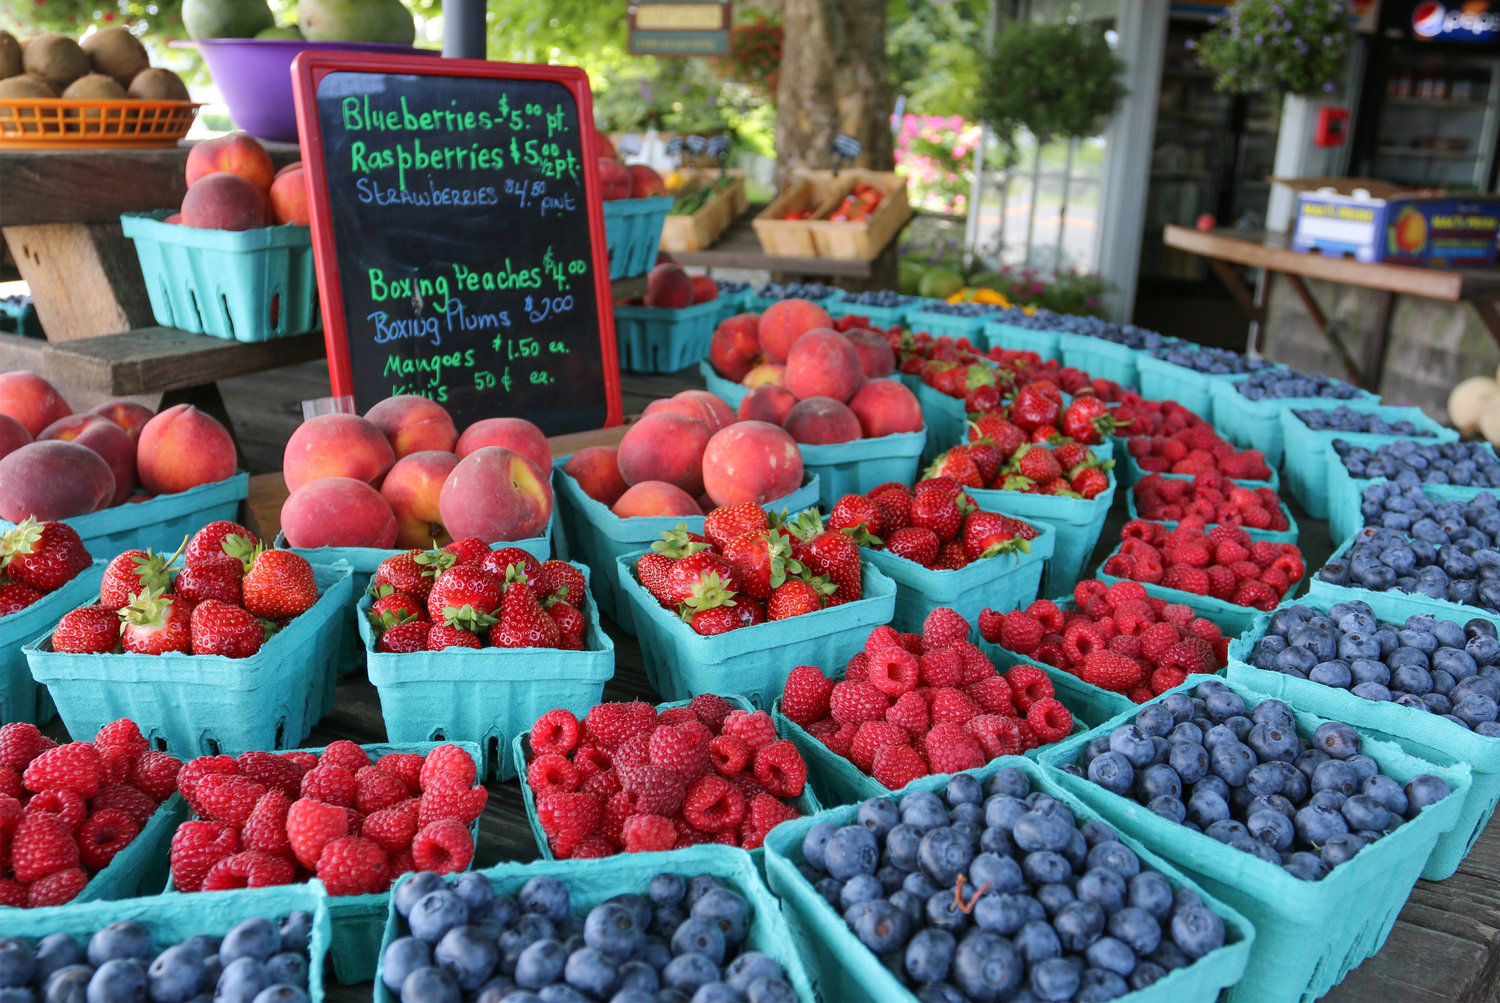 Produce at Walkers' Roadside Stand